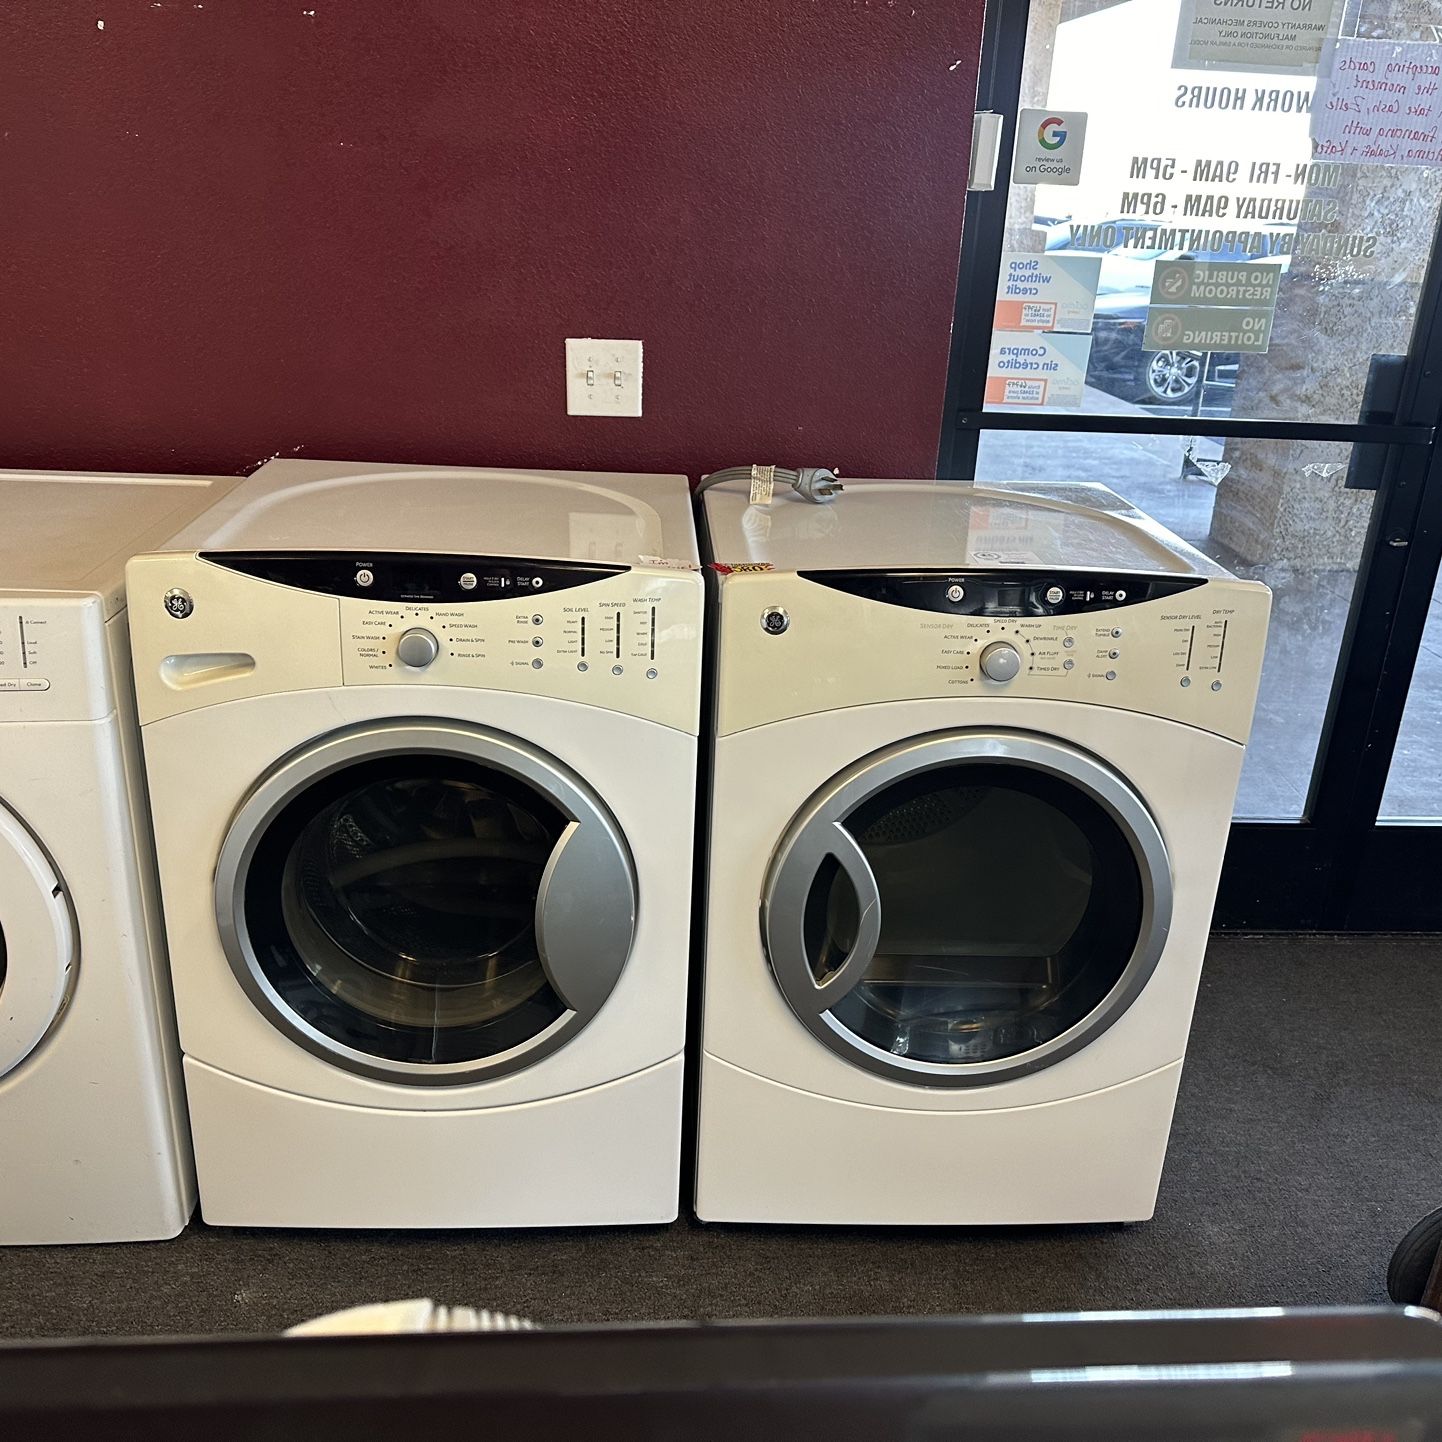 GE Frontloading Washer And Electric Dryer